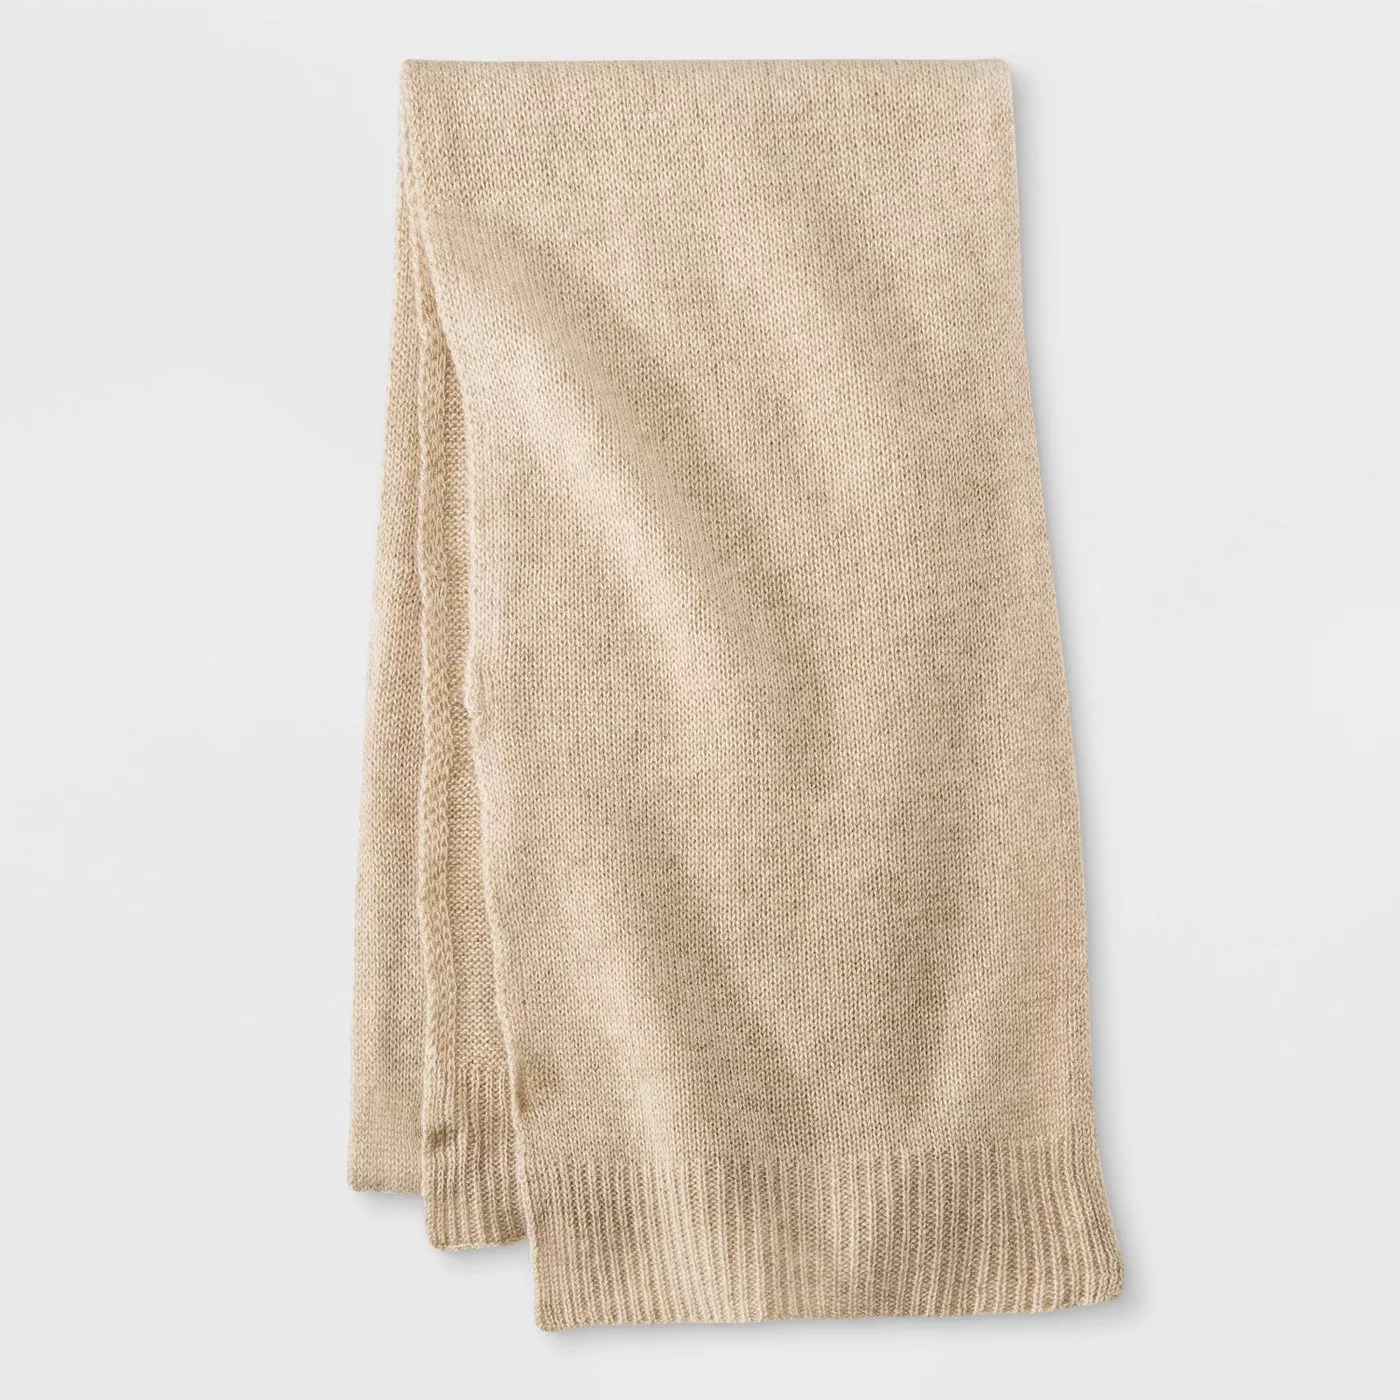 Women's Cashmere Scarf - A New Day™ One Size - image 2 of 3